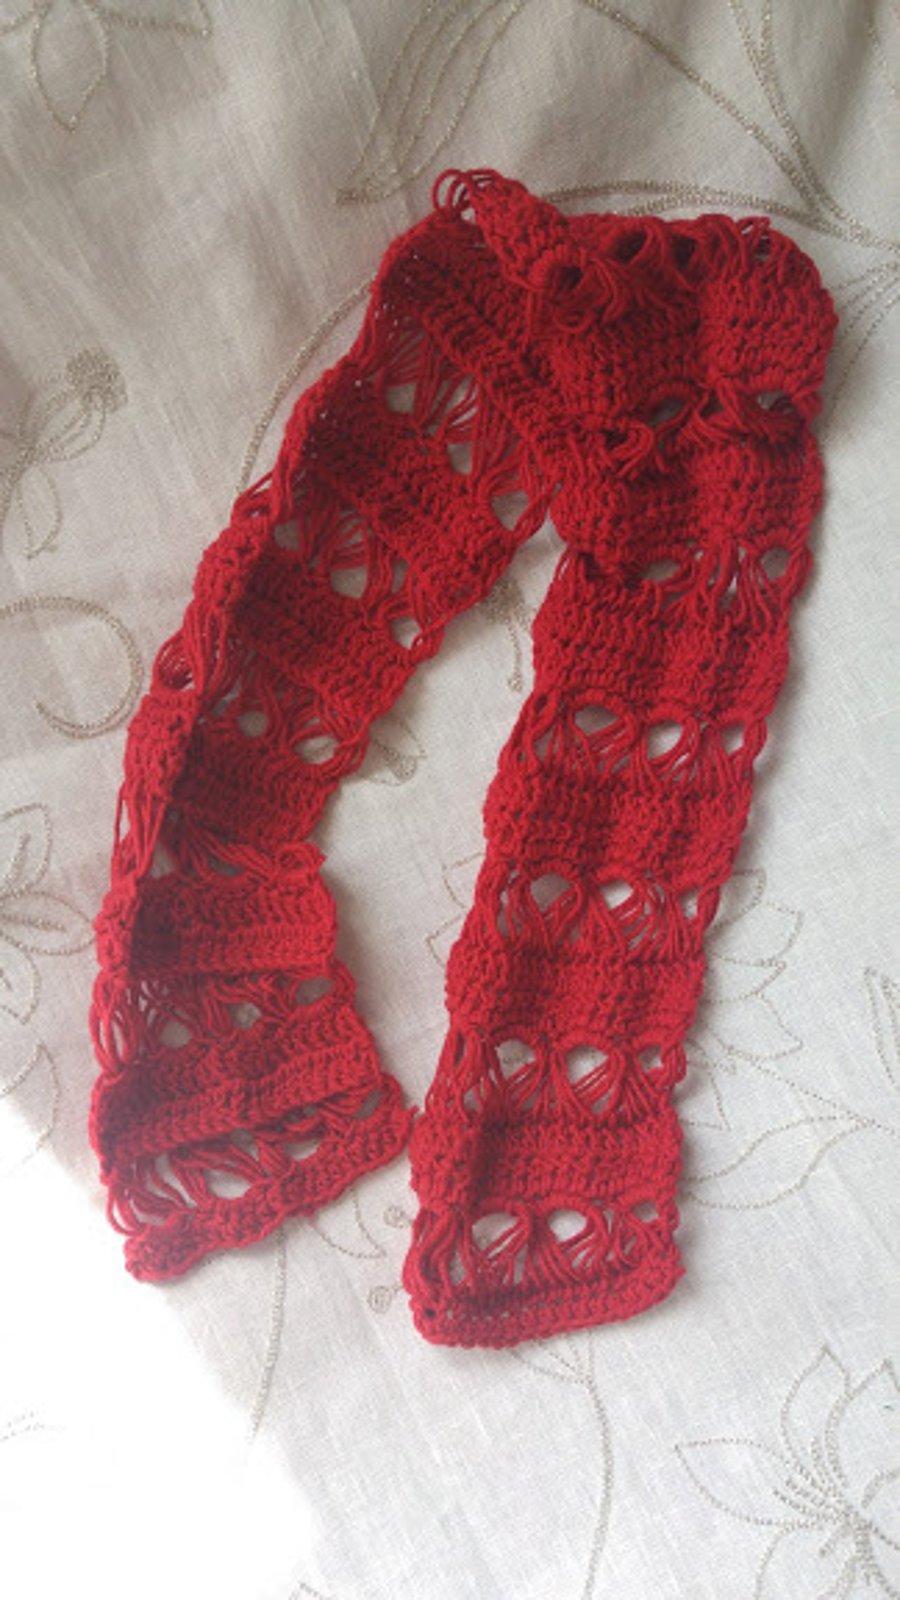 Red Broomstick lace Crochet Scarf